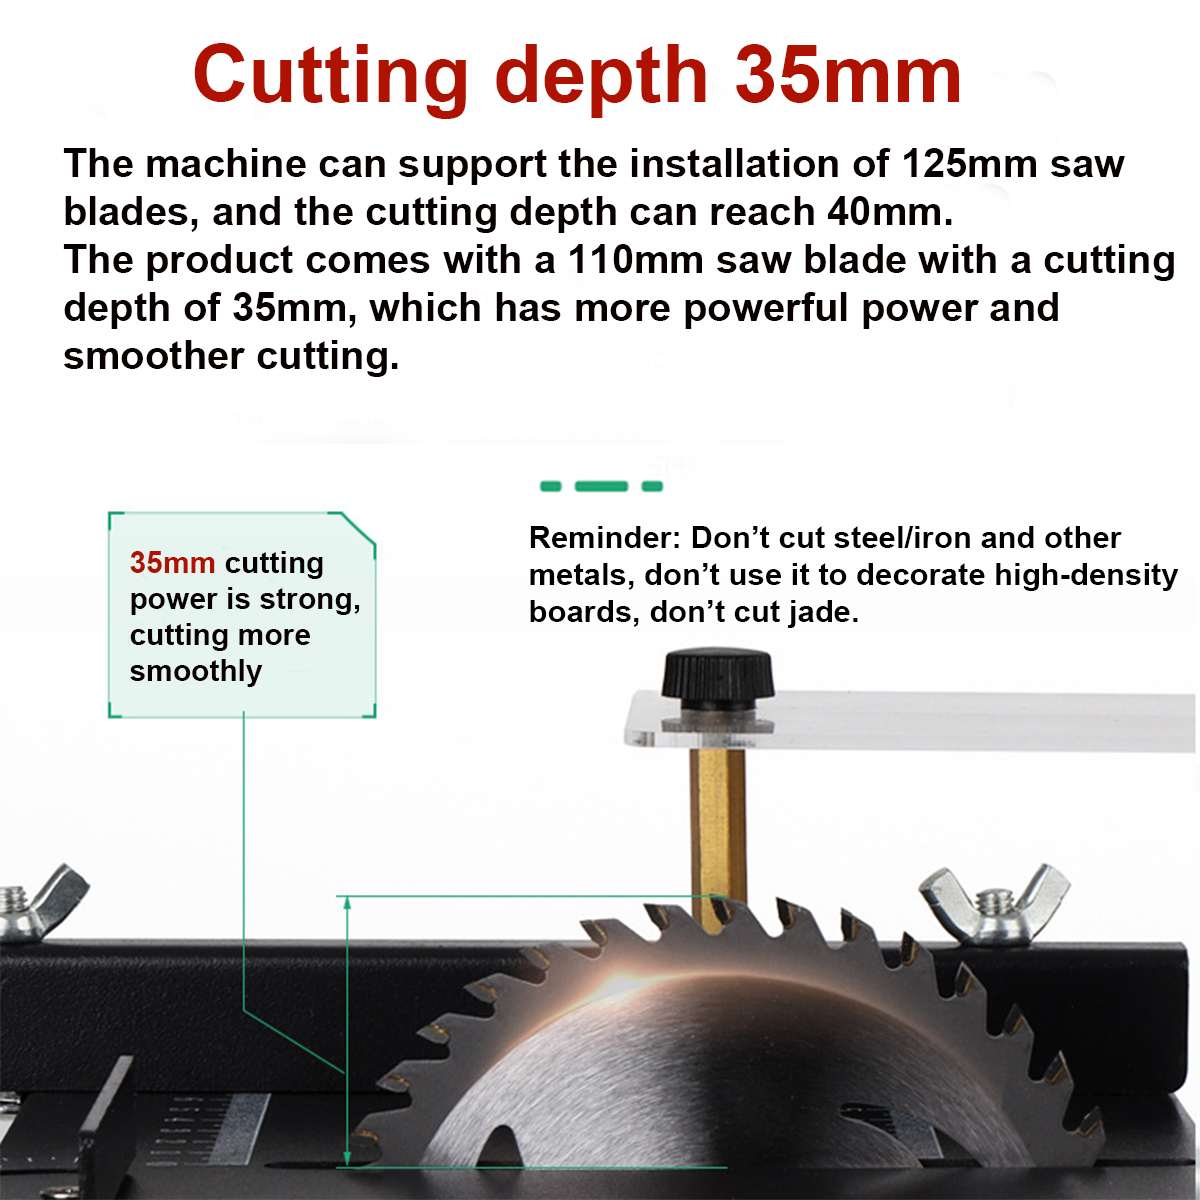 Precision Table Saw mini Bench Saw Set DIY Woodworking Hobby Model Crafts Cutting Tool 110mm Circular Saw Blade Angle Ruler